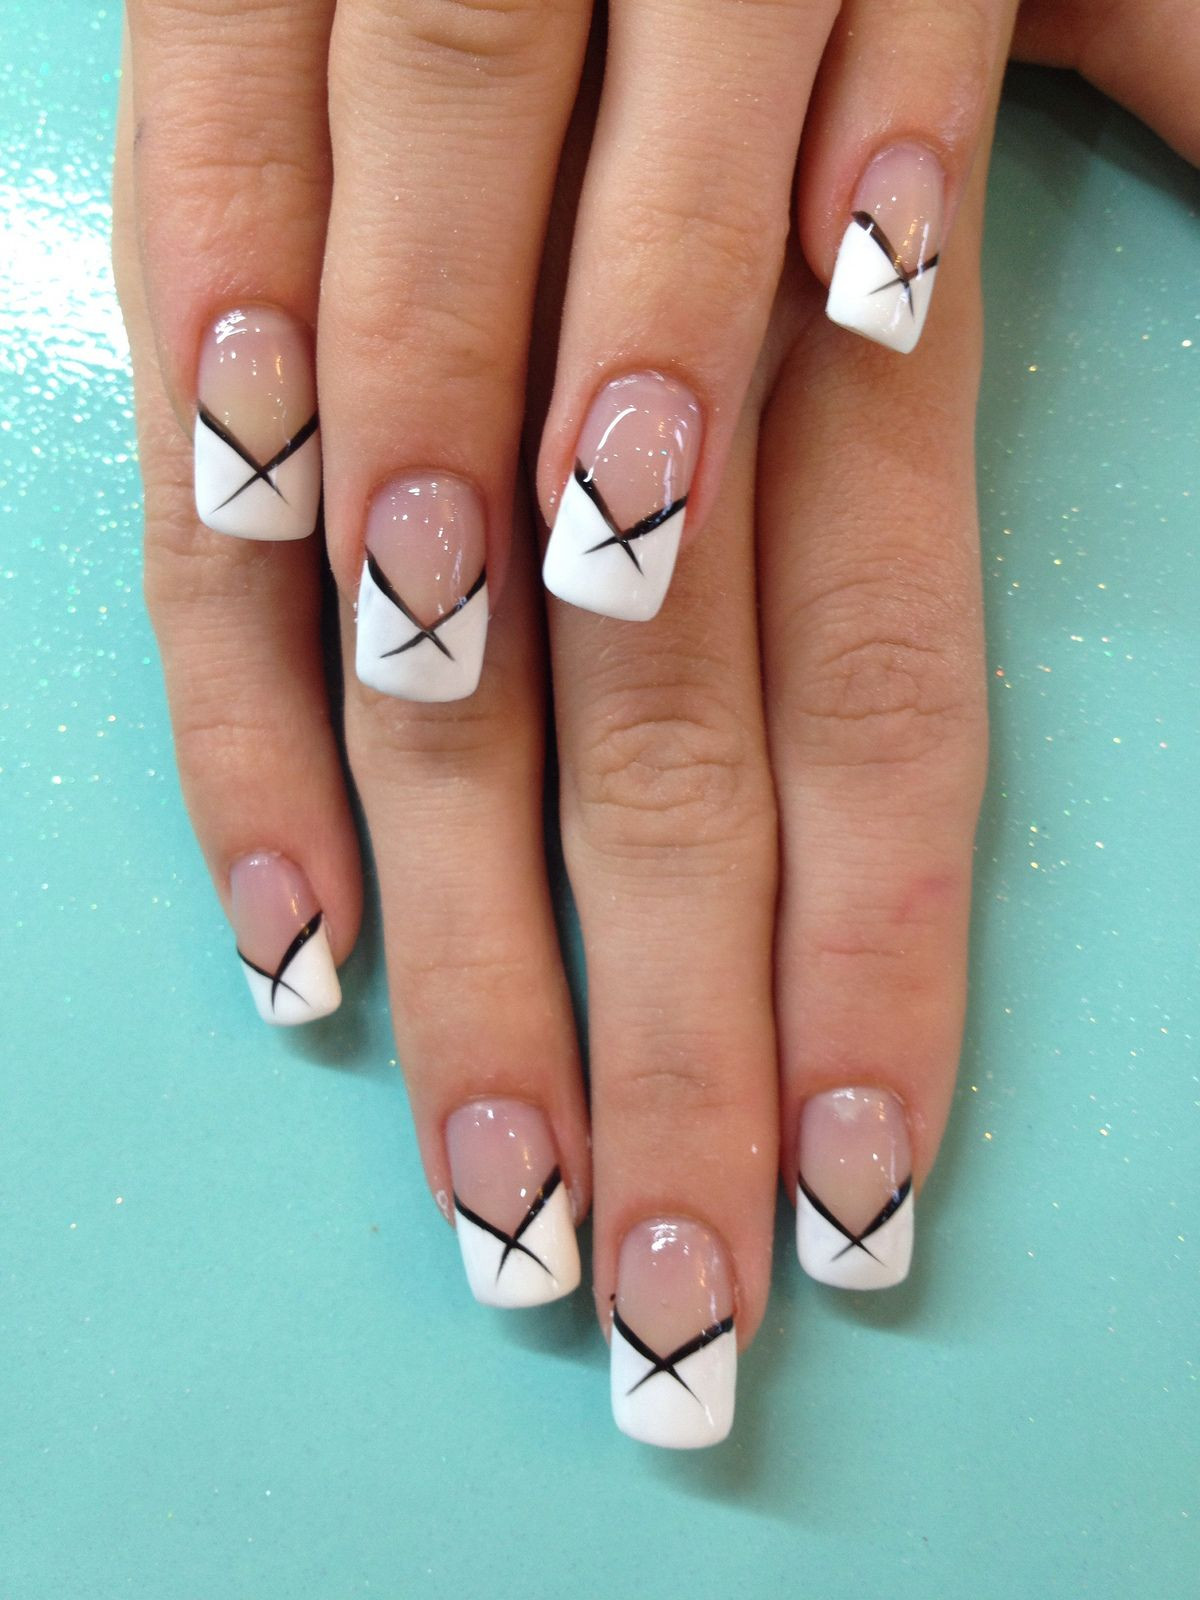 French White Tip Nail Designs
 Cool White French tips with black flick nail art